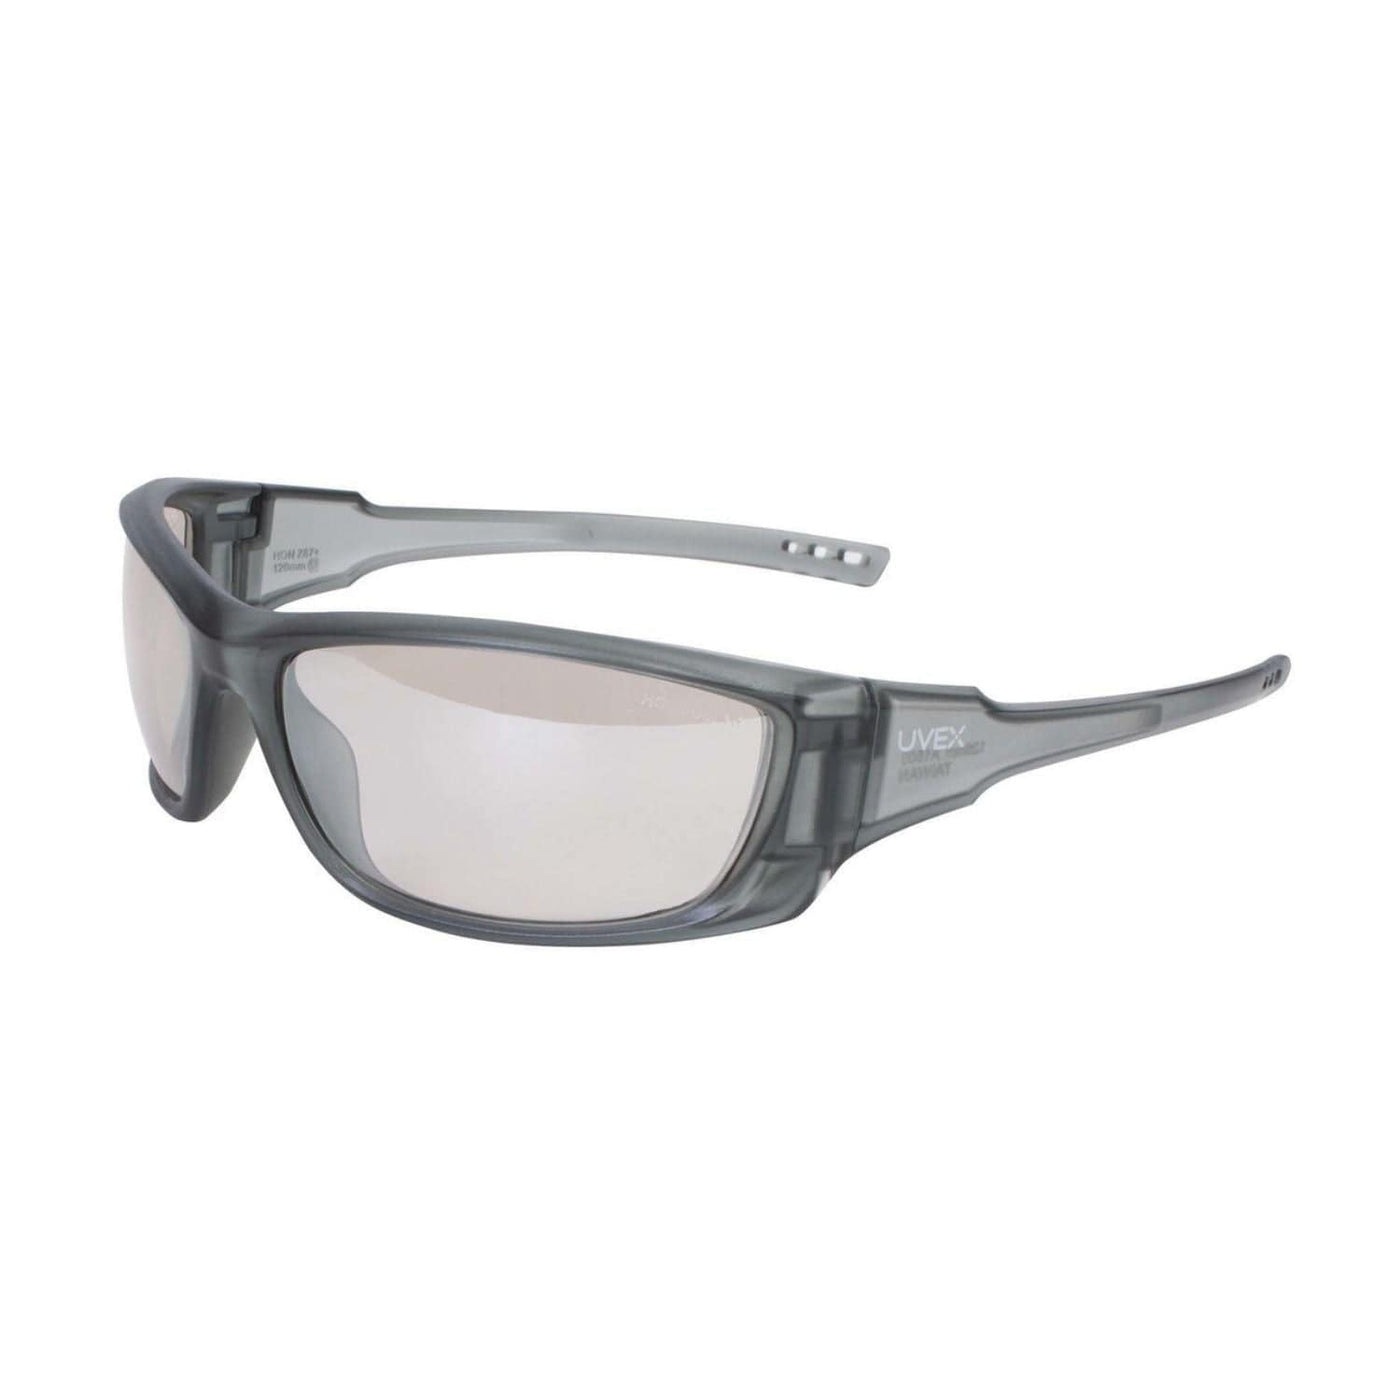 Howard Leight Leight A1500 Solid Gray Frame Hardcoat Lens SCT-Reflect 50 Apparel